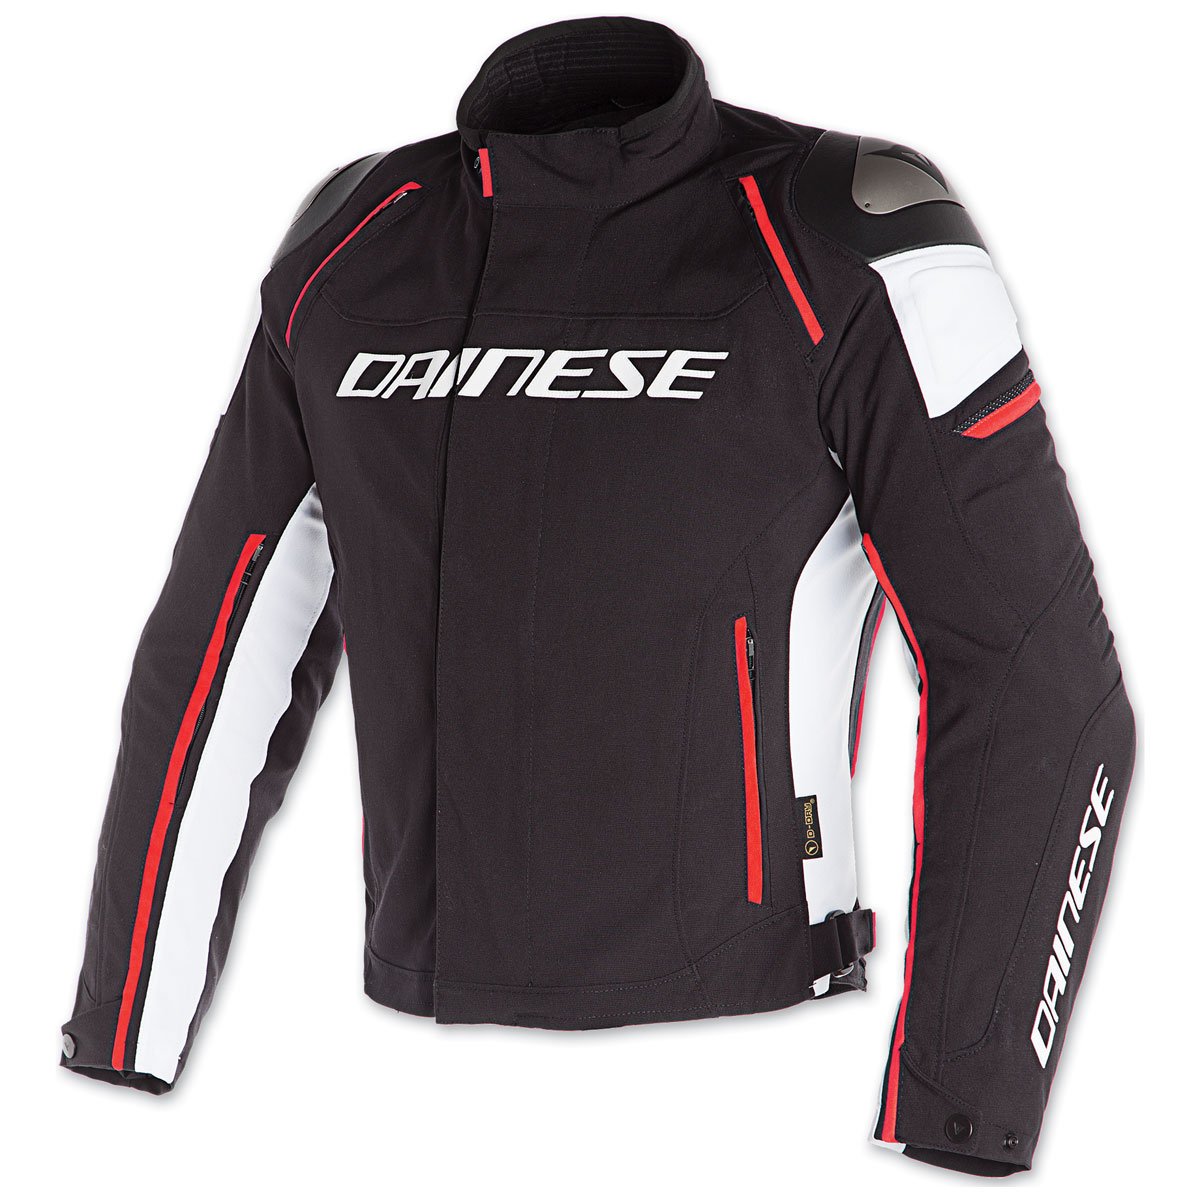 Image of Dainese Racing 3 D-Dry Jacket Black White Fluo Red Size 46 EN